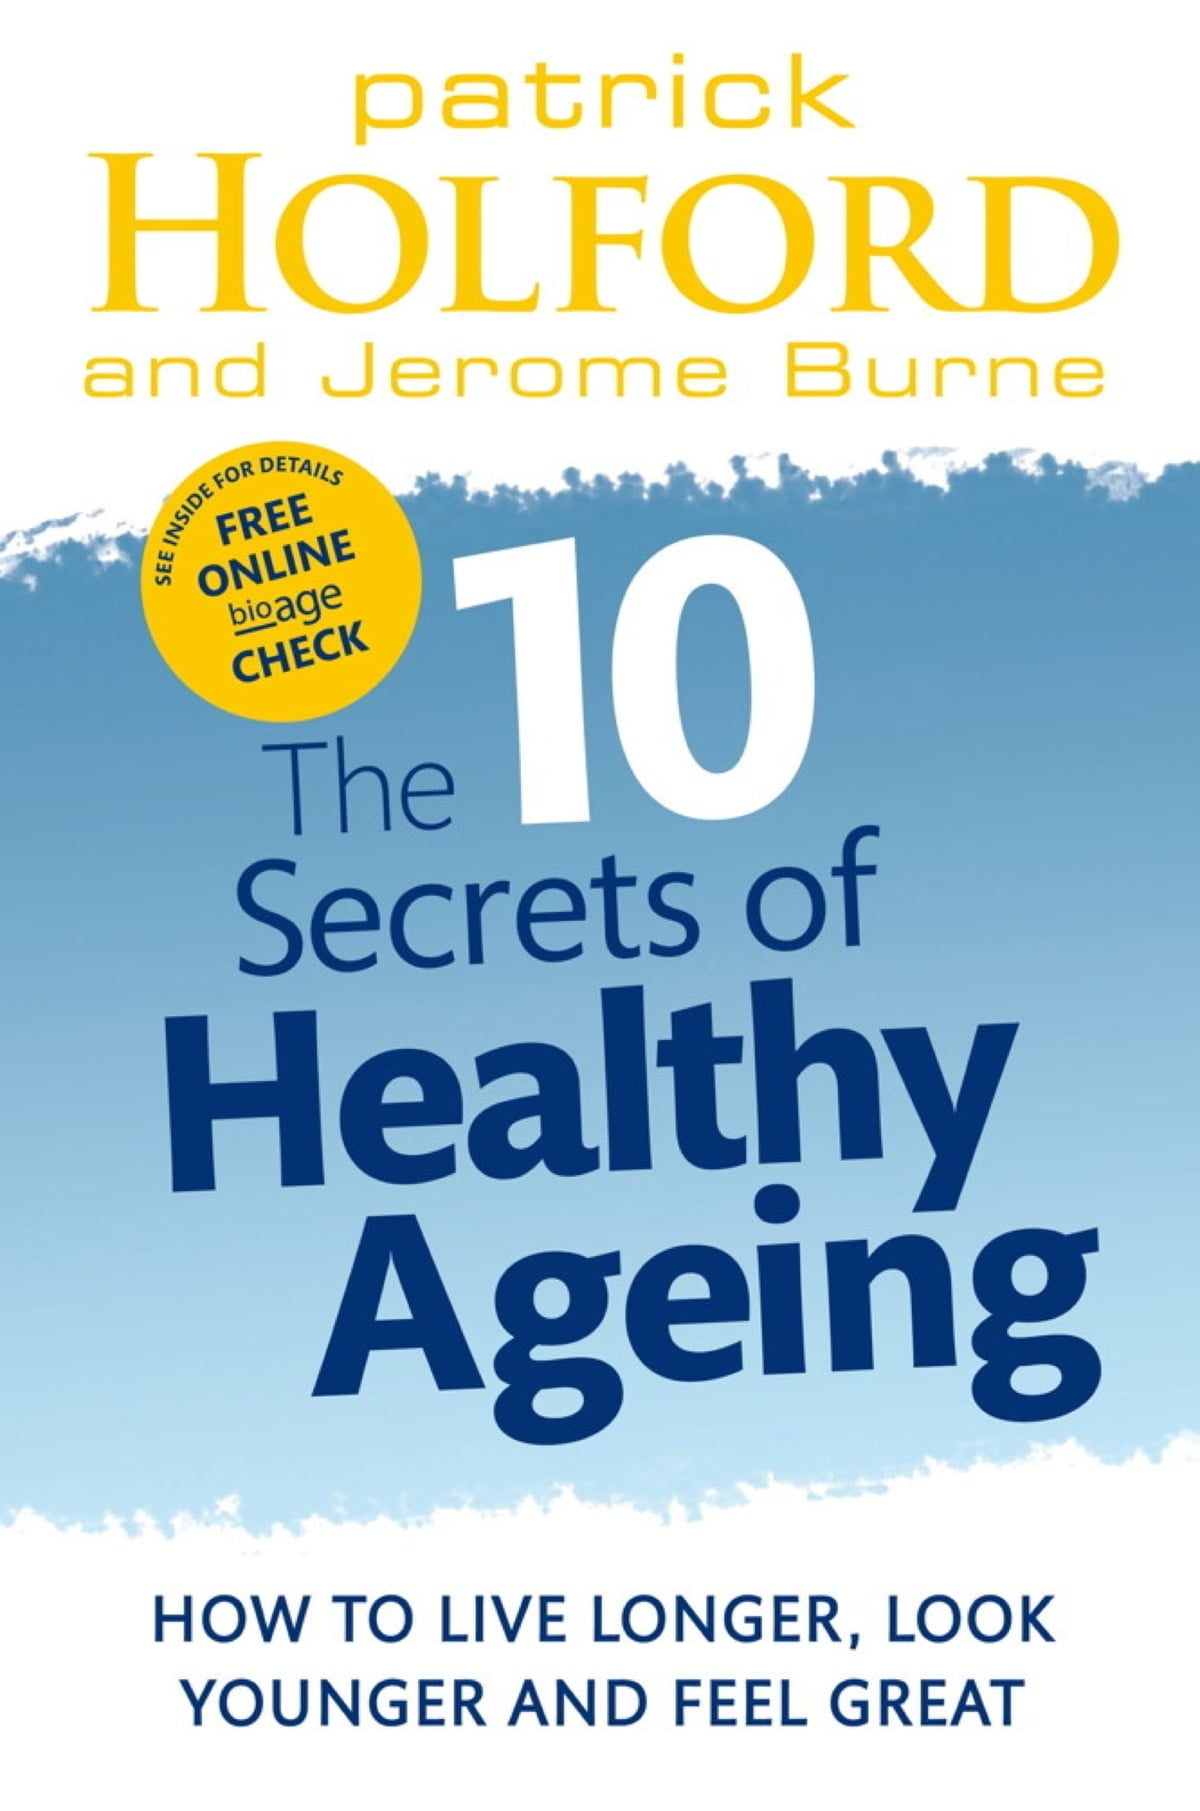 10 Secrets of Healthy Ageing Patrick Holford and Jerome Burne